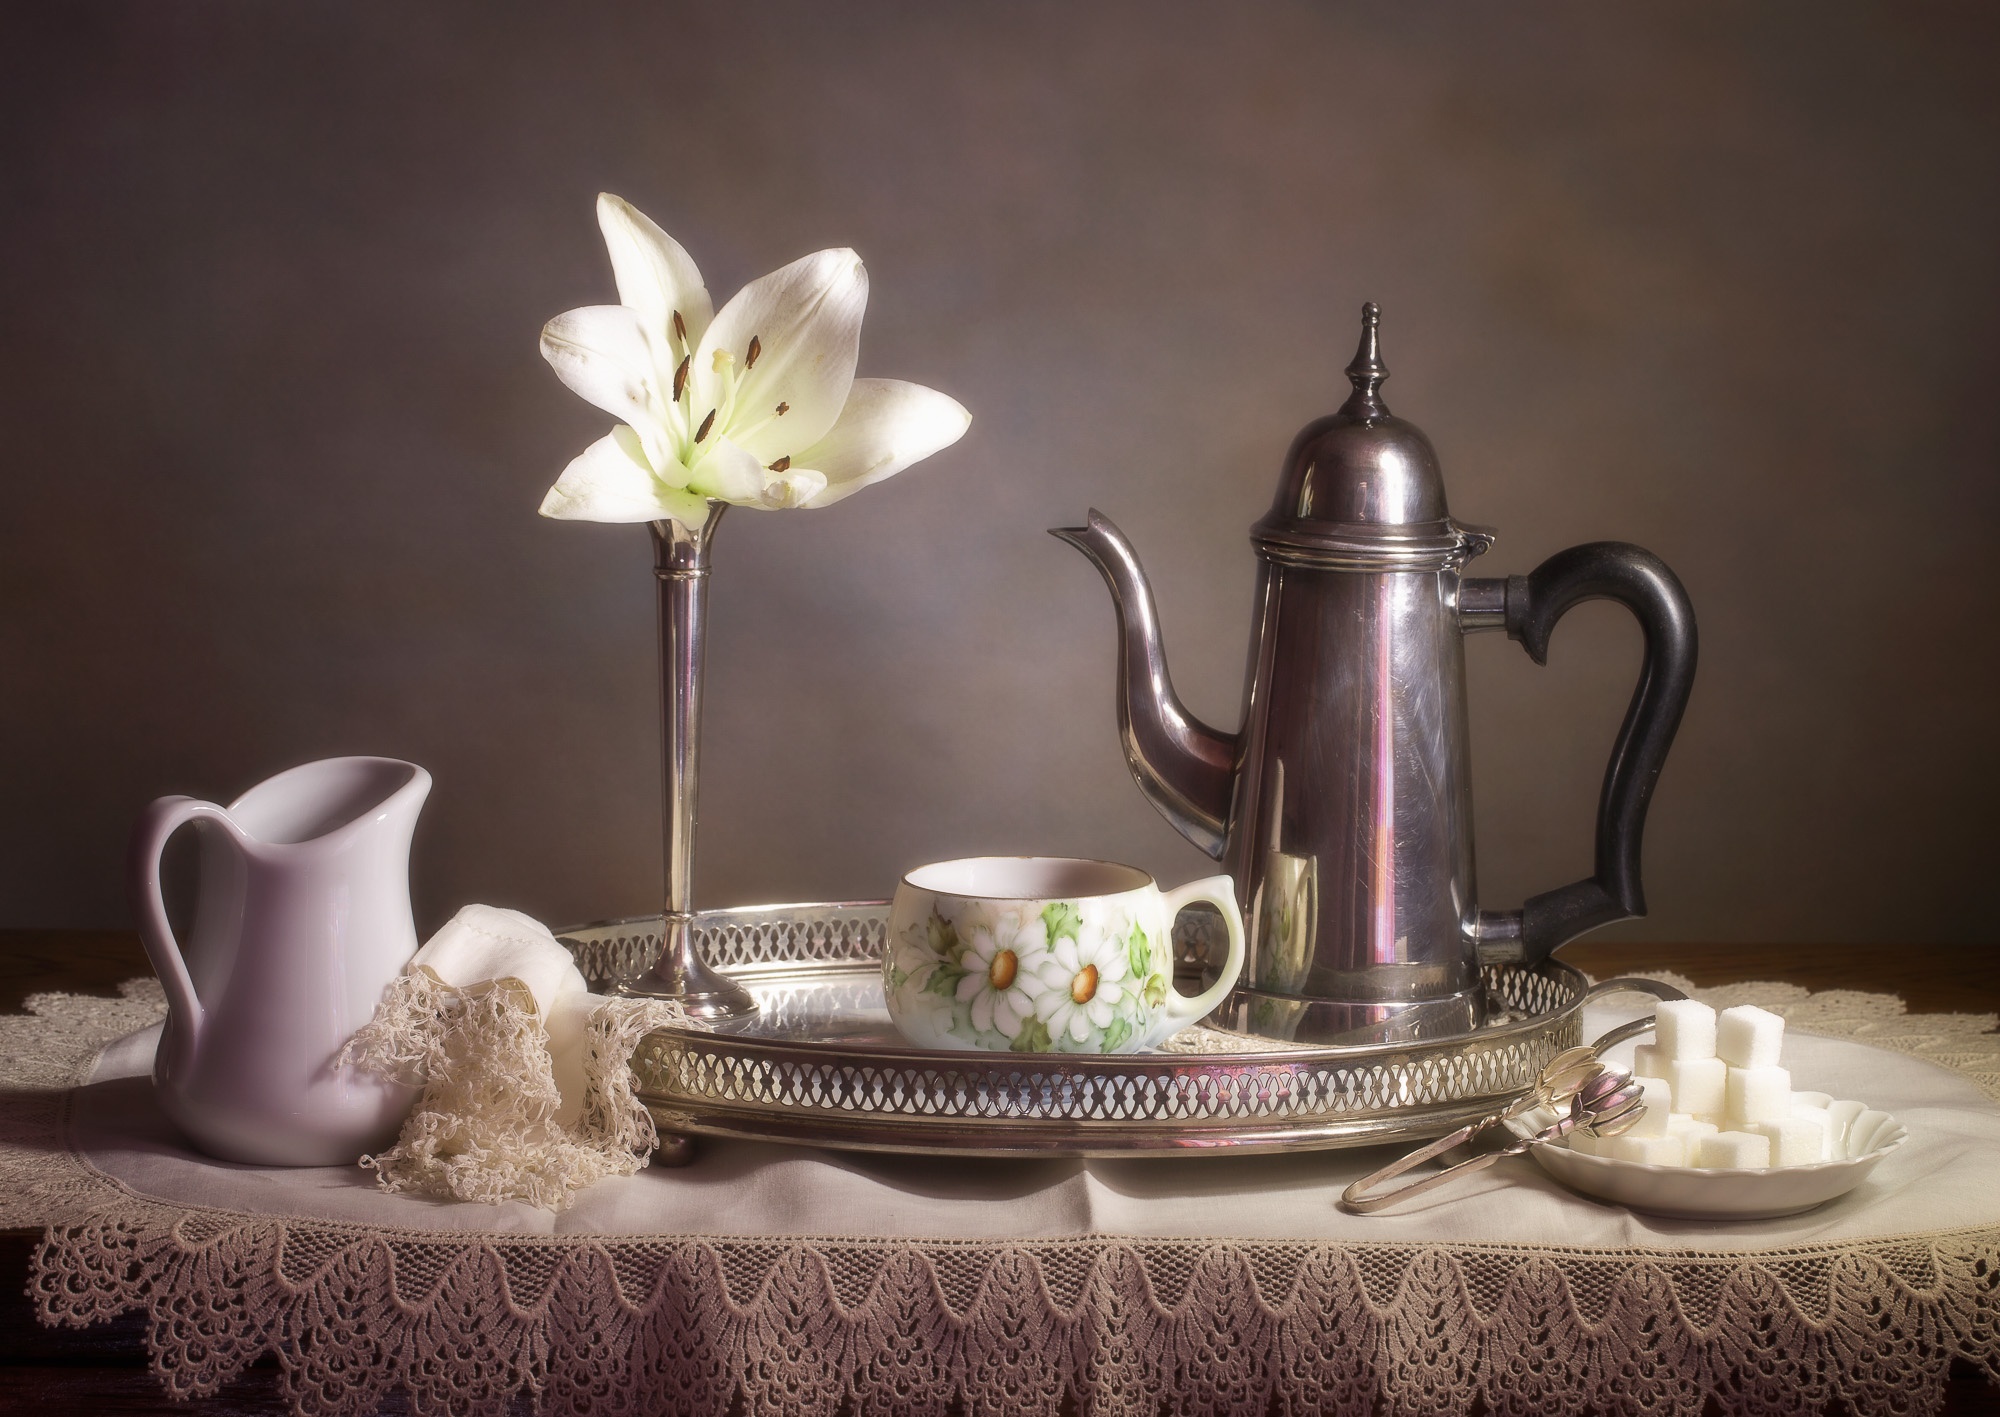 photography, still life, cup, lily, sugar